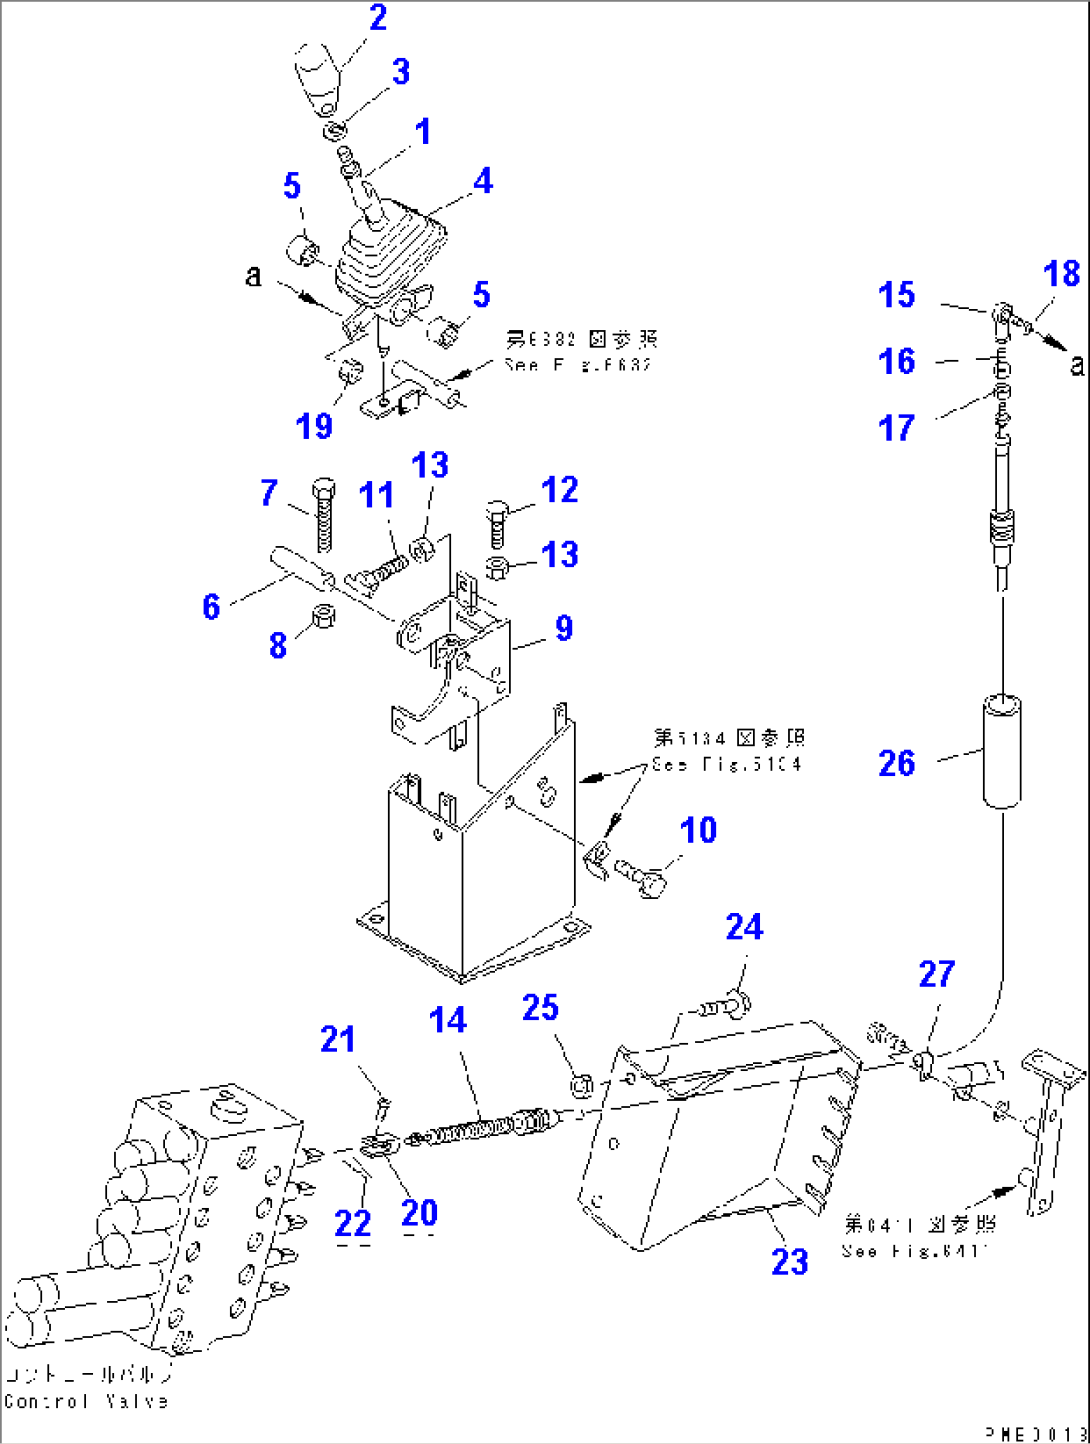 FRONT ATTACHMENT CONTROL LEVER AND LINKAGE (WITH 5-SPOOL CONTROL VALVE)(#60001-)